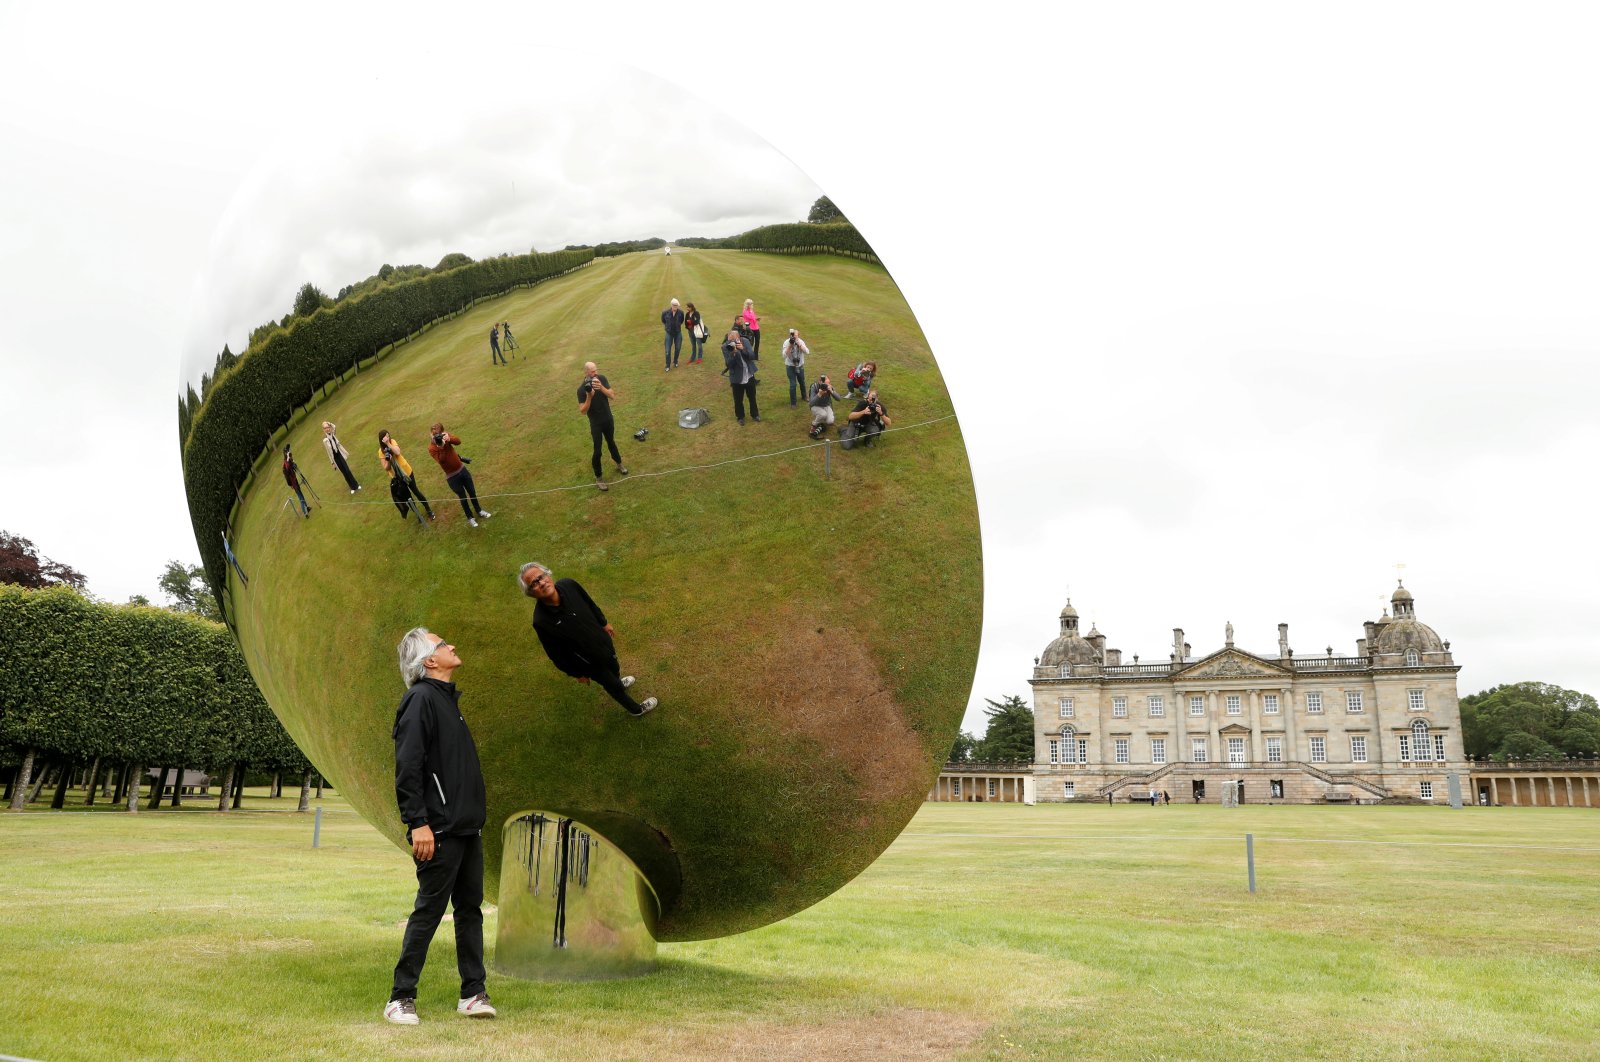 British-Indian artist Anish Kapoor is reflected in one of his sculptures as he poses for photographs in the gardens at Houghton Hall in Norfolk, Britain, July 9, 2020. (REUTERS PHOTO)